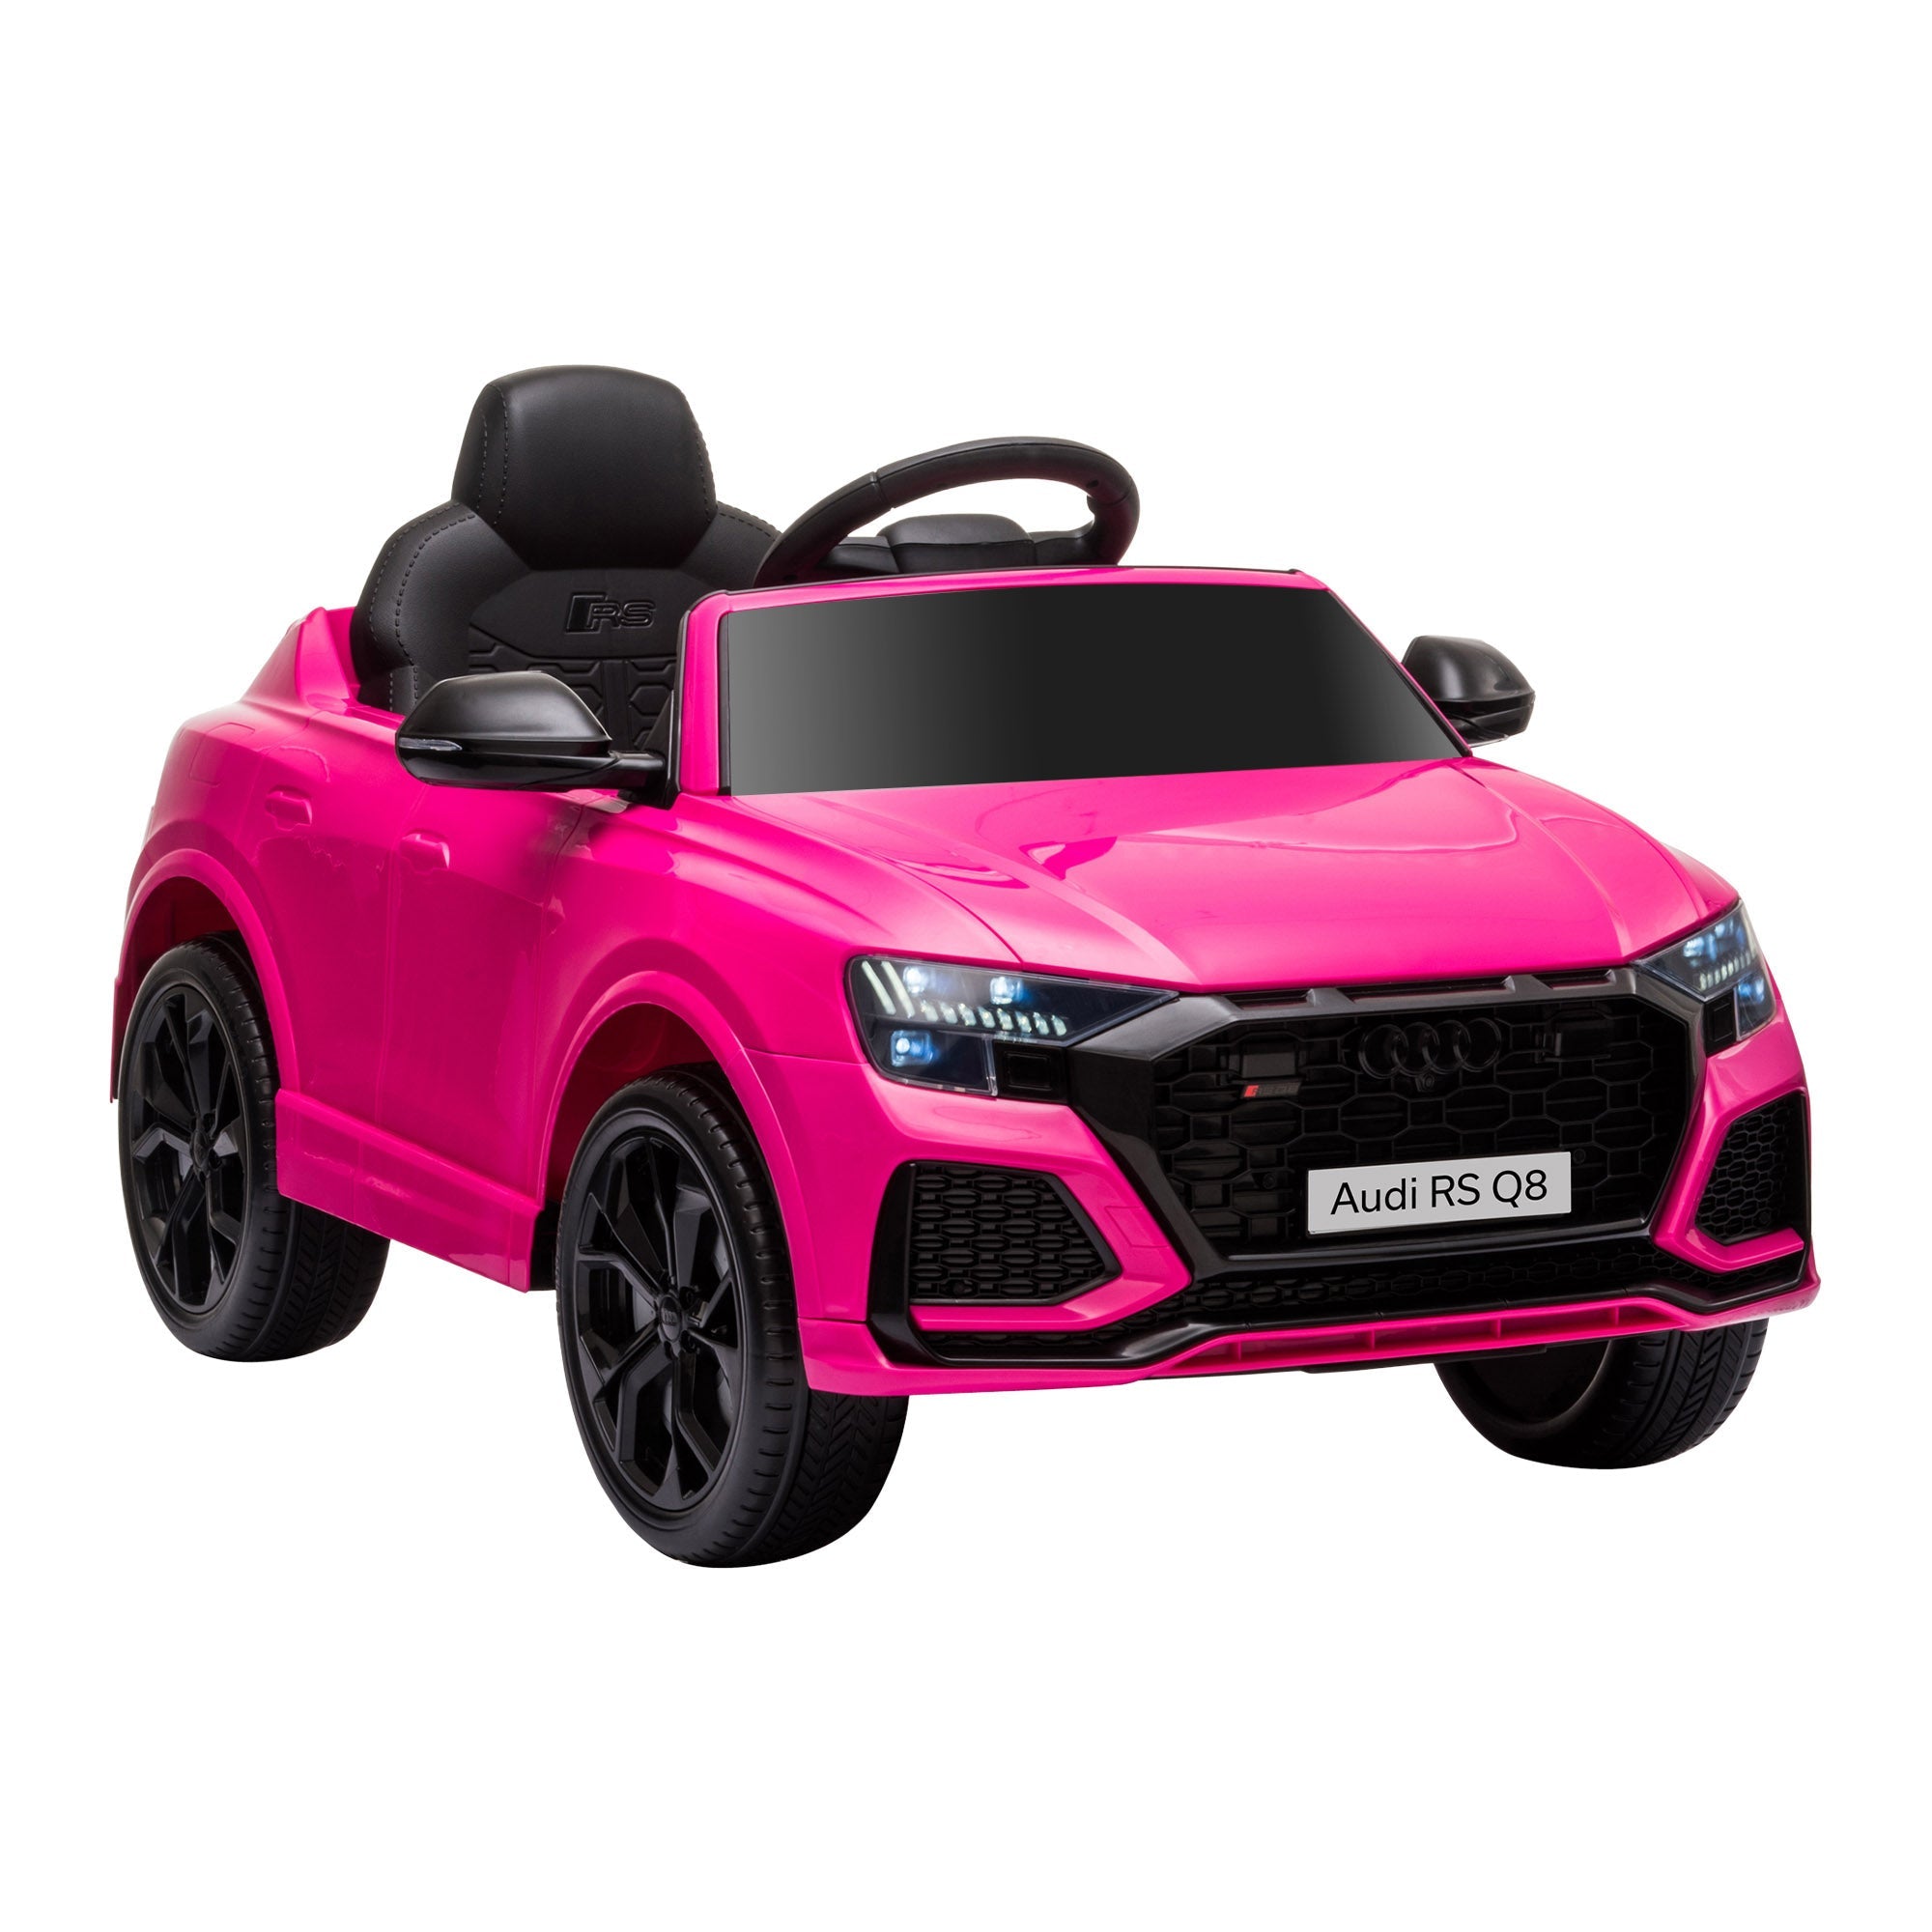 Maplin Plus Audi RS Q8 6V Kids Electric Ride On Toy Car with Remote Control, USB & Bluetooth (Pink)